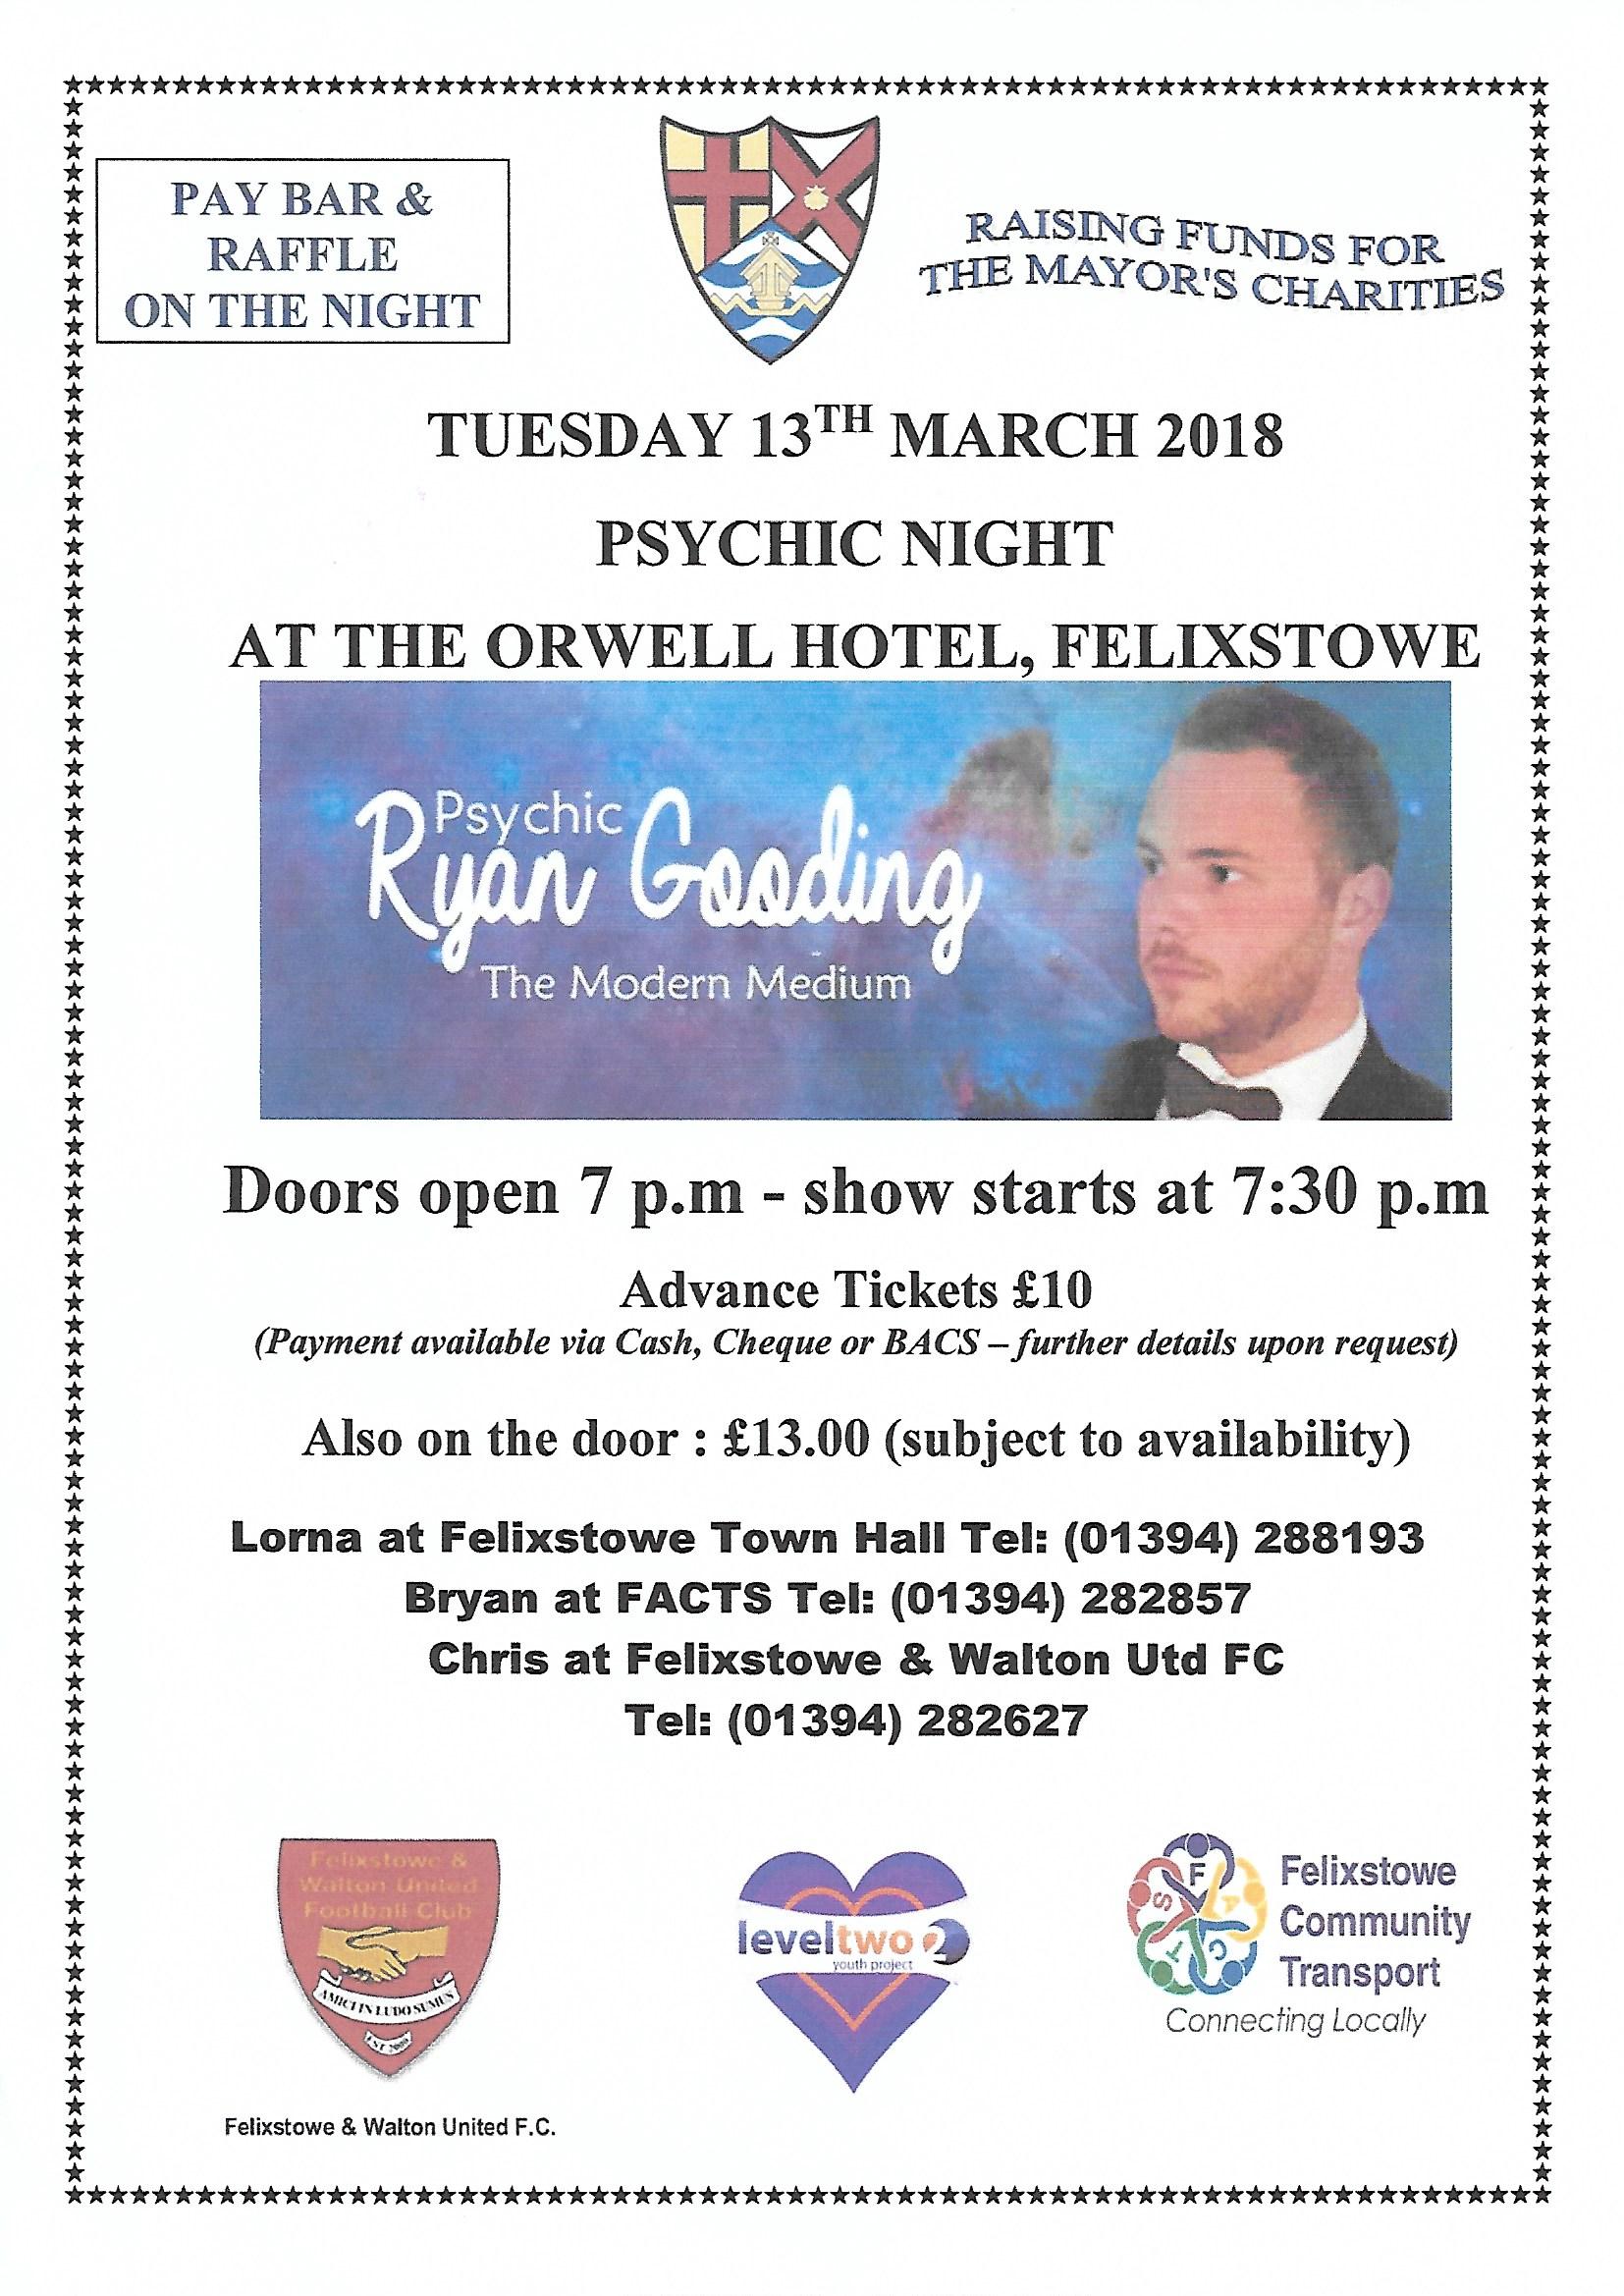 Psychic Night, Tuesday 13 March 2018